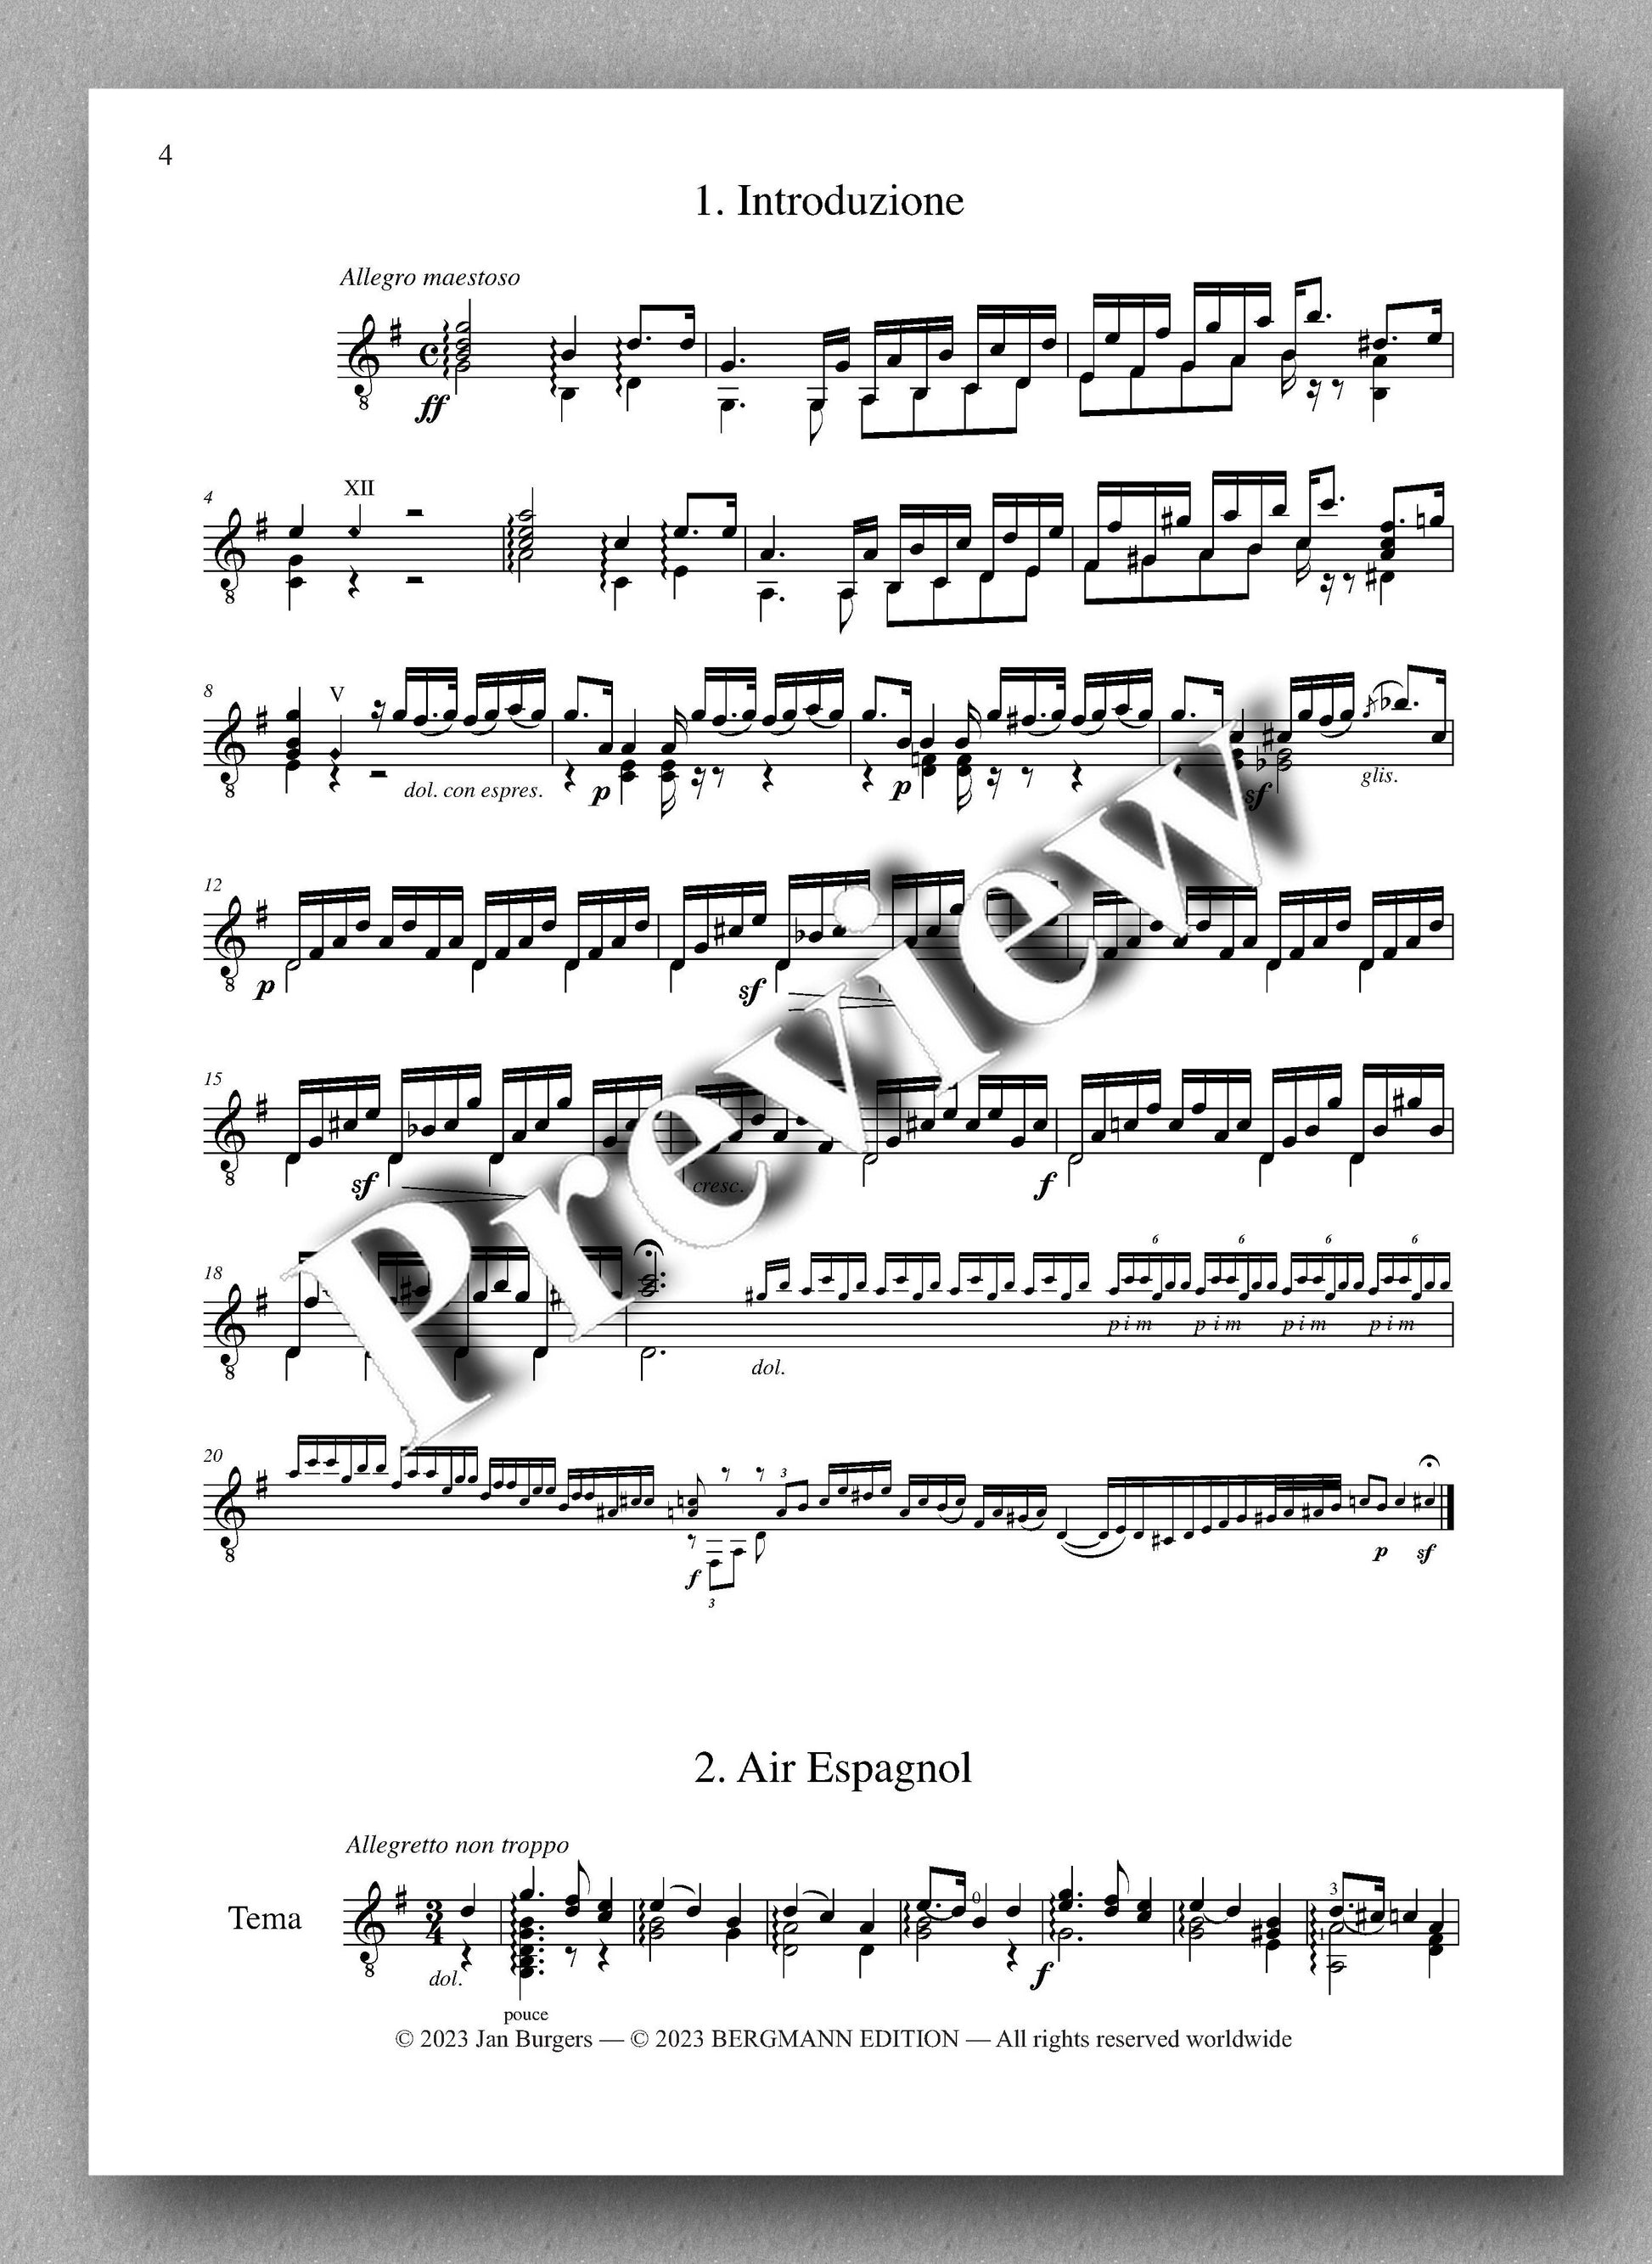 Molino, Collected Works for Guitar Solo, Vol. 47 - preview of the music score 1